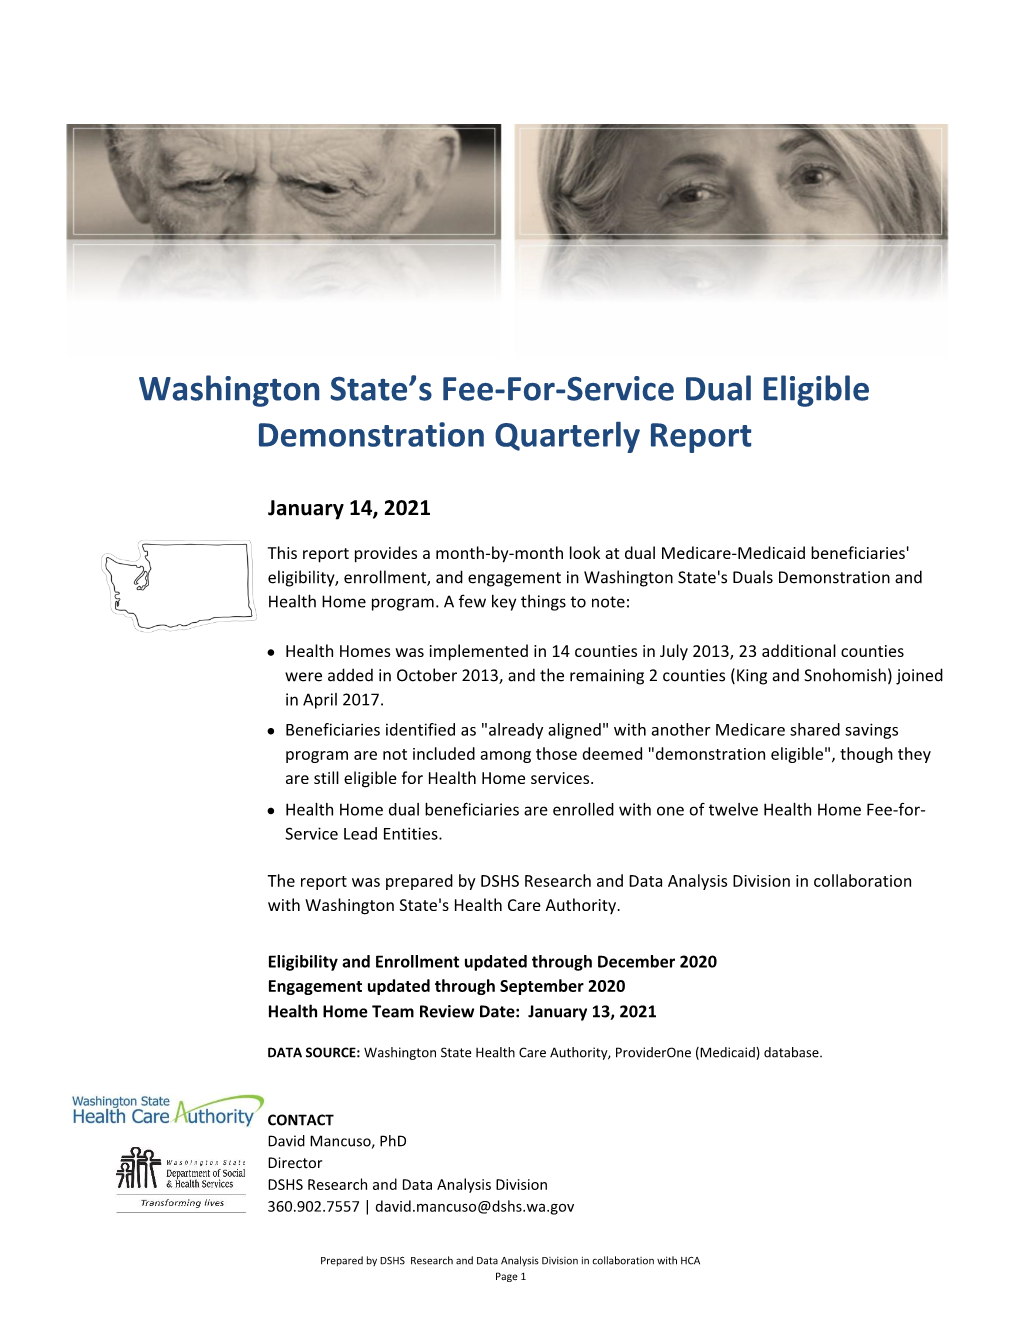 Washington State's Fee-For-Service Dual Eligible Demonstration